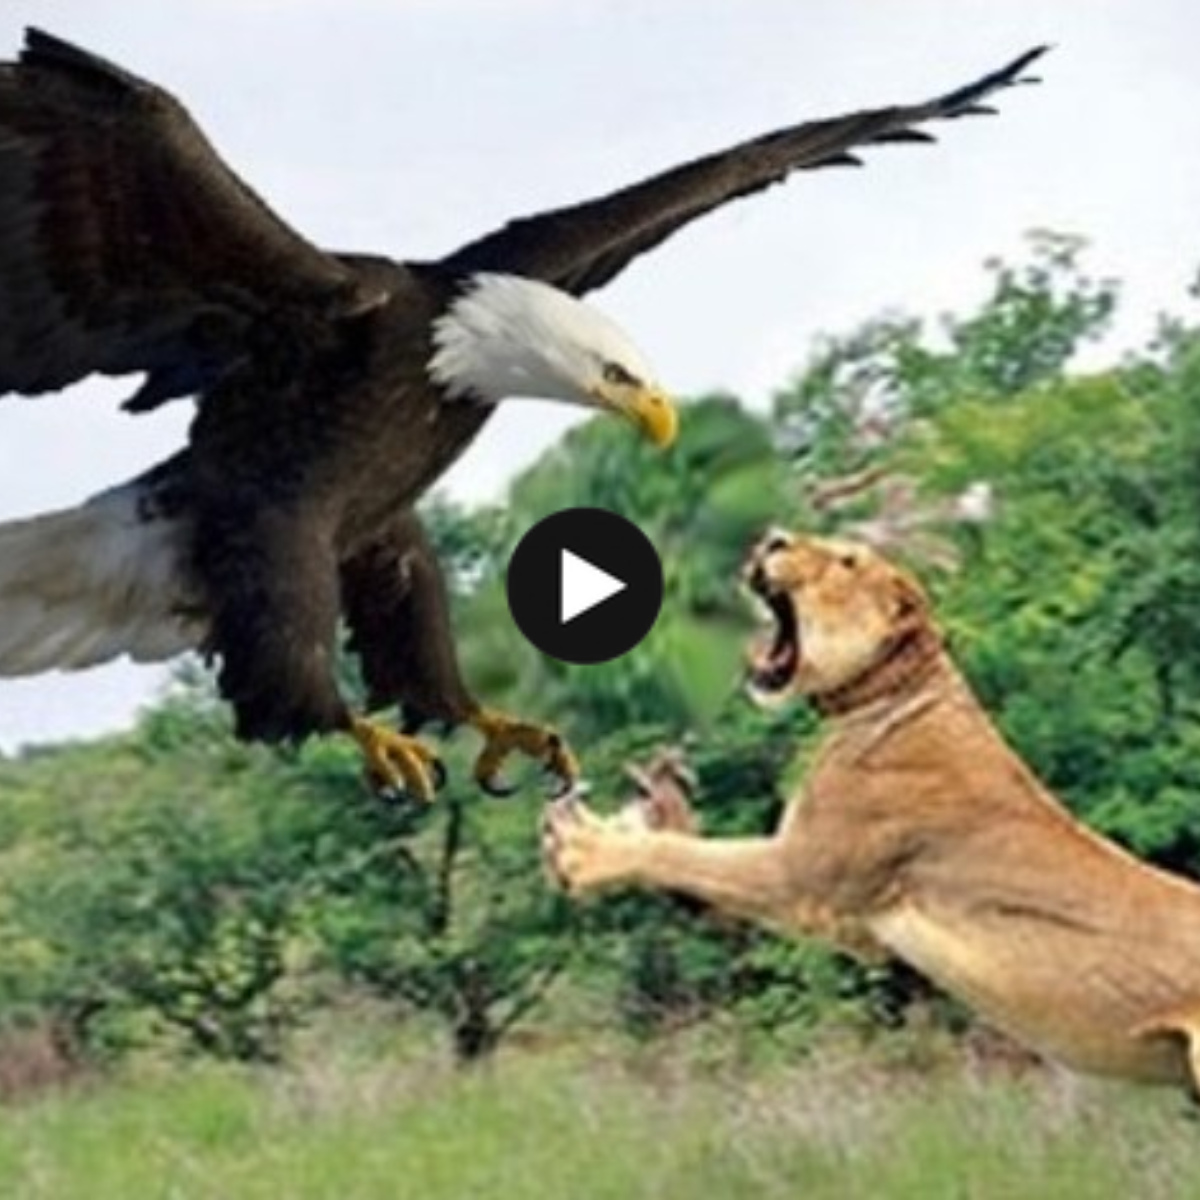 Using its razor-sharp talons, the African eagle brings down the lion king and tenderly hoists it into the air.